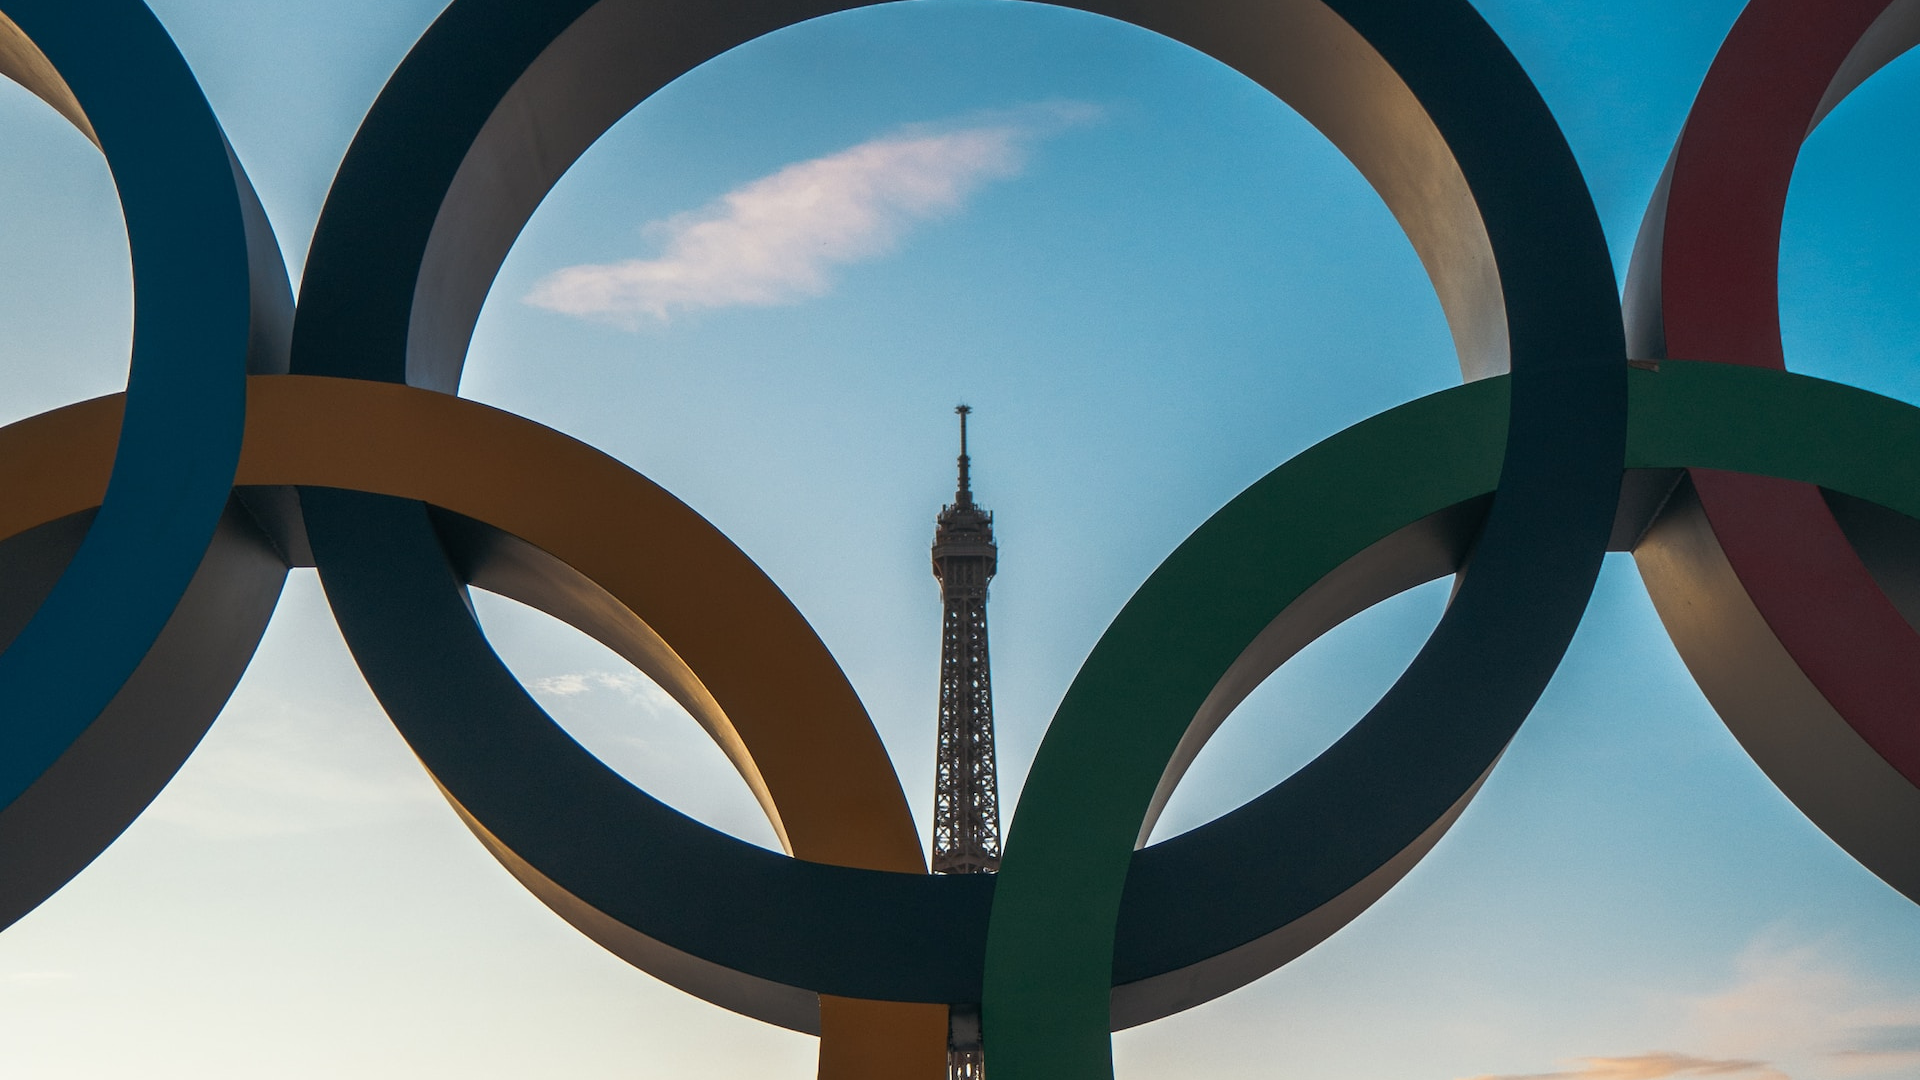 Paris 2024 Olympics A Greenwashing Nightmare or a Genuine Effort to